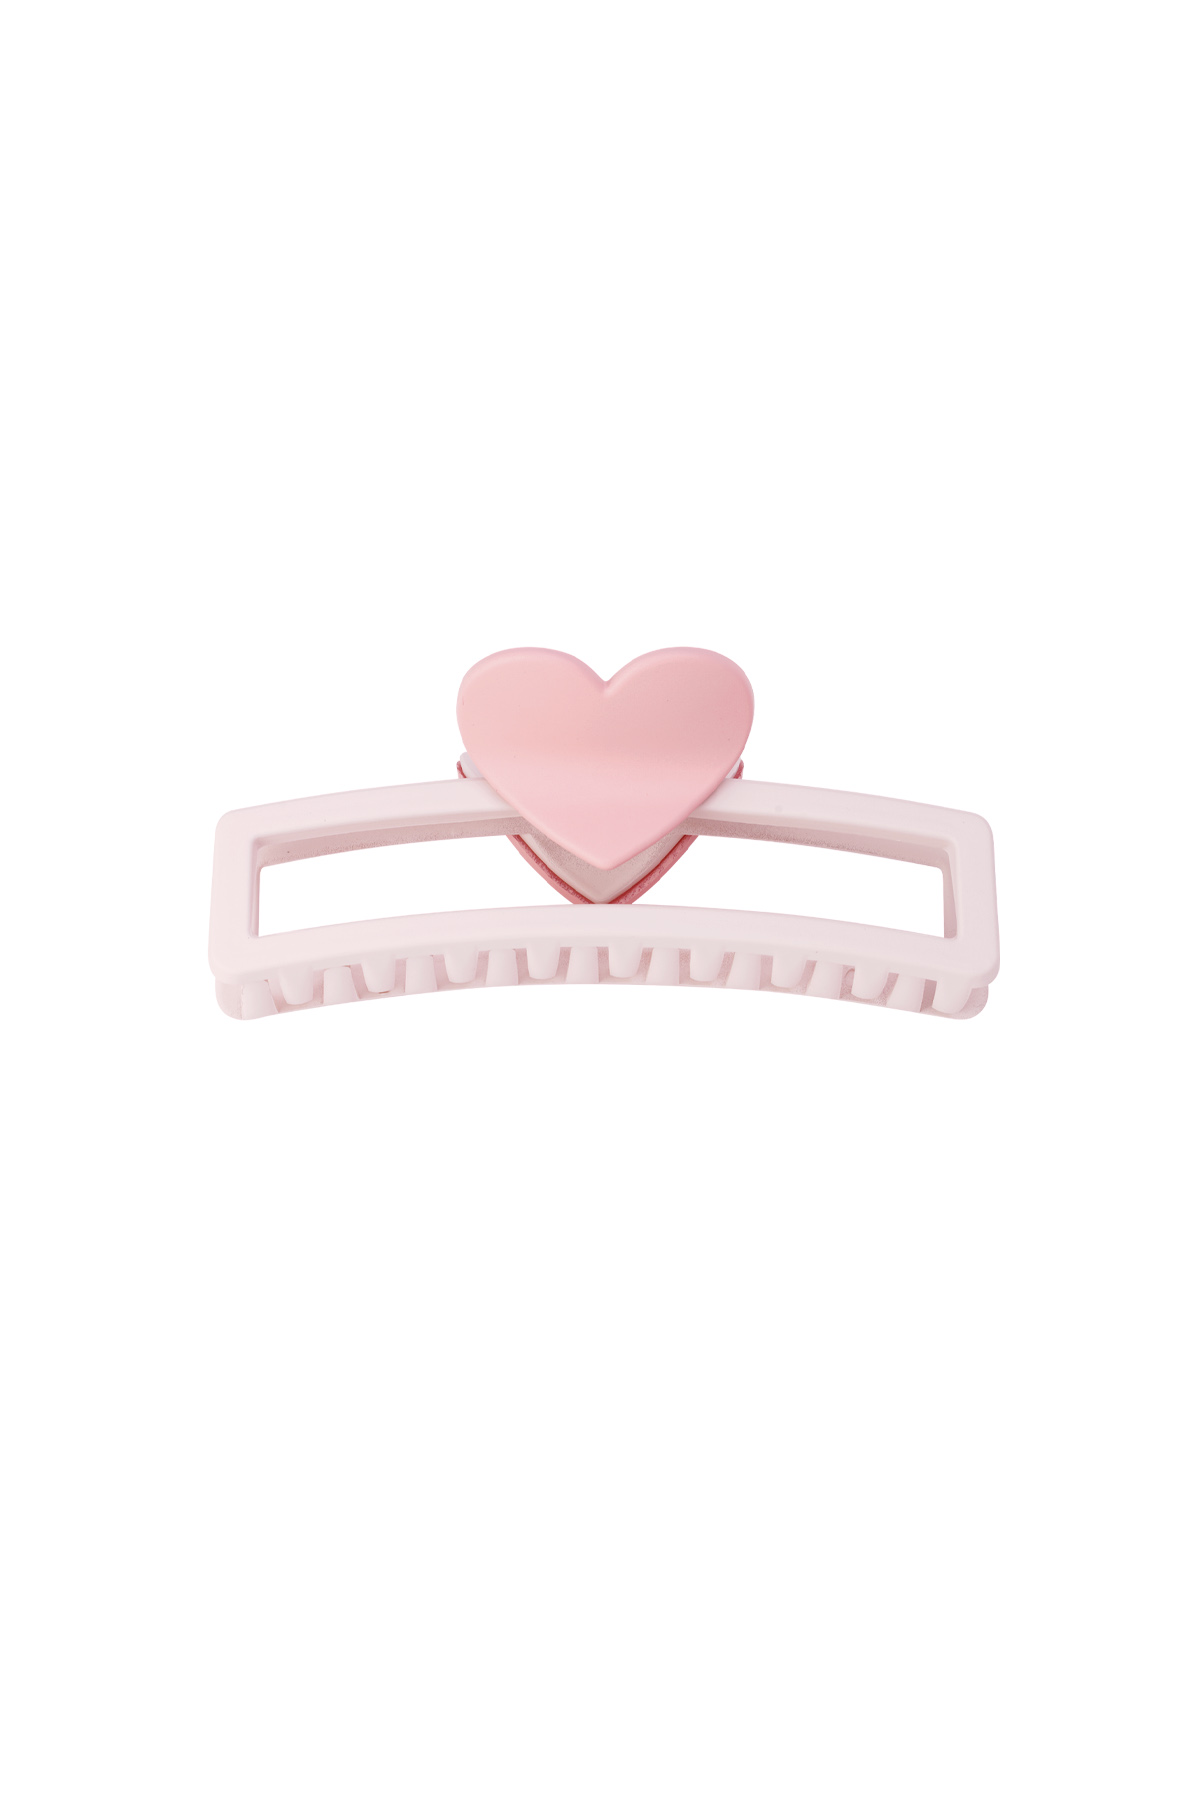 hair clip with heart-shaped handle - light pink